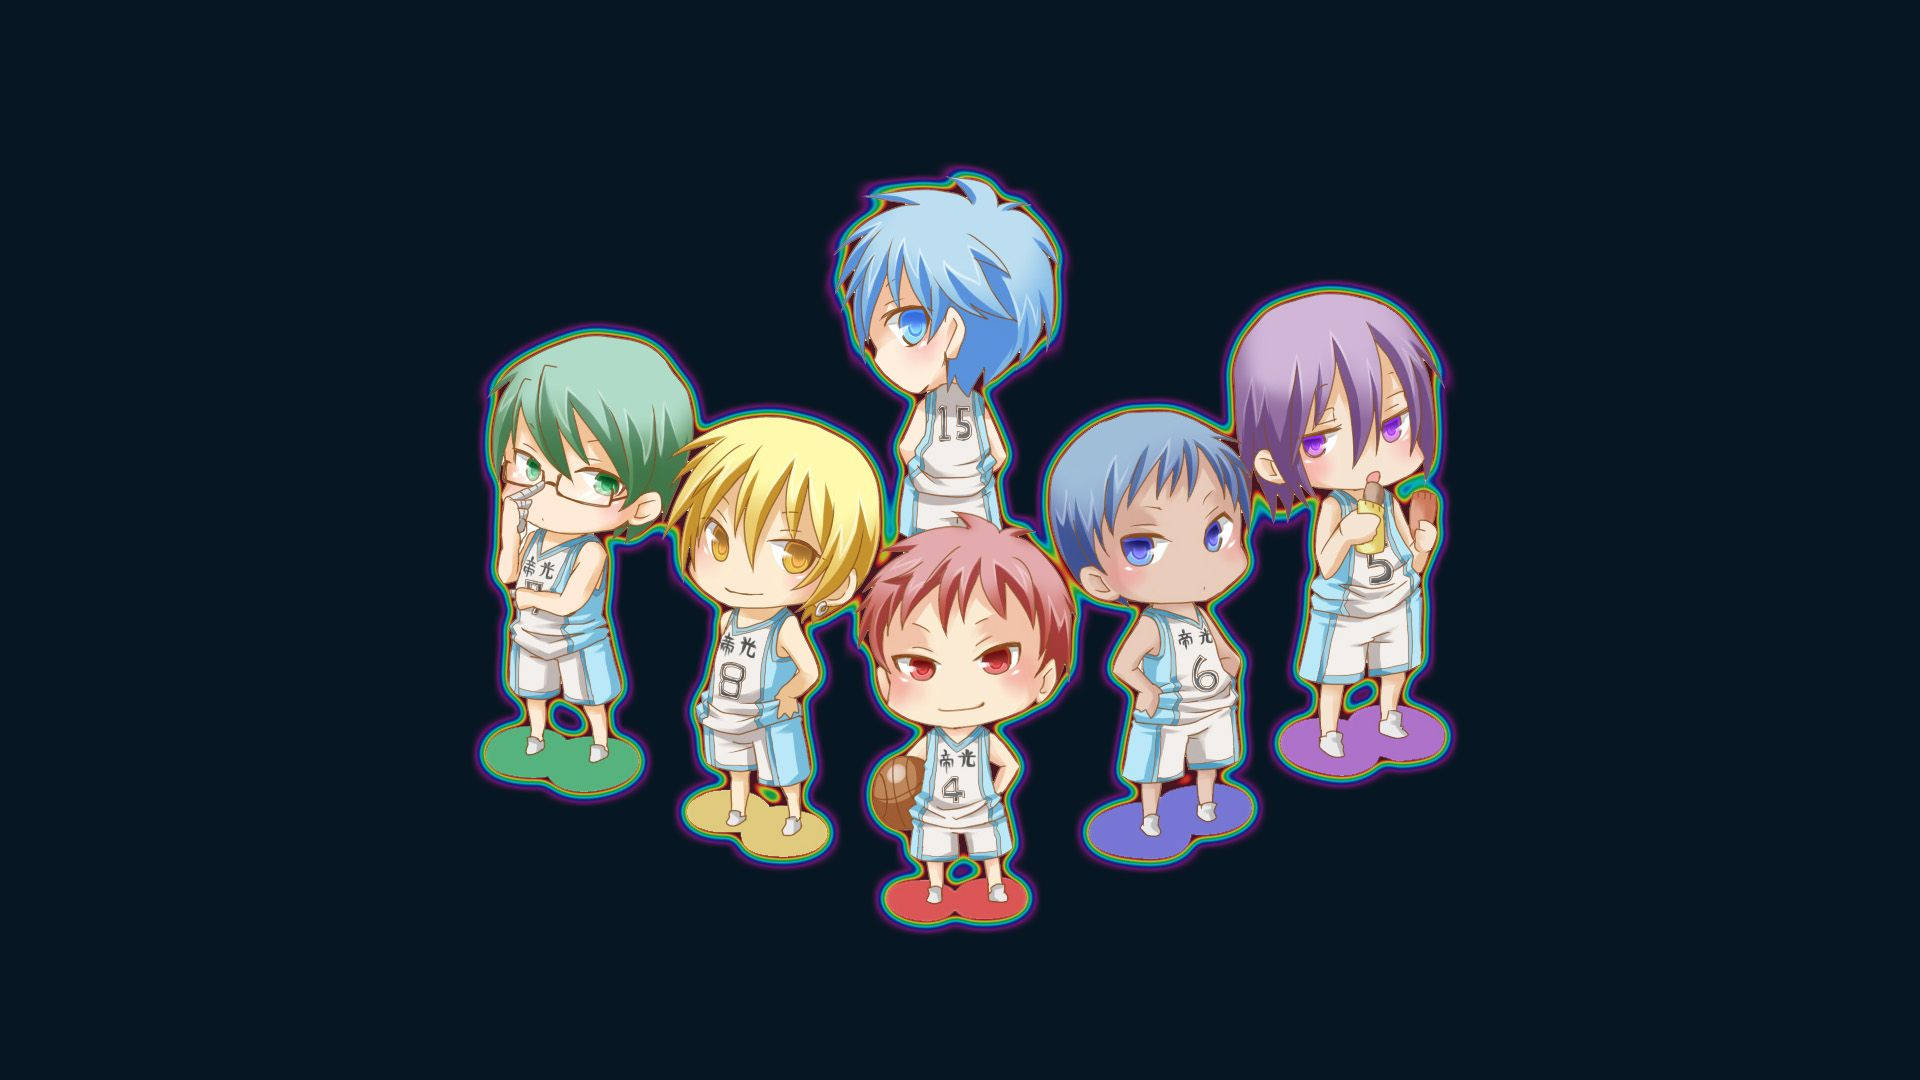 Chibi 1920X1080 Wallpaper and Background Image